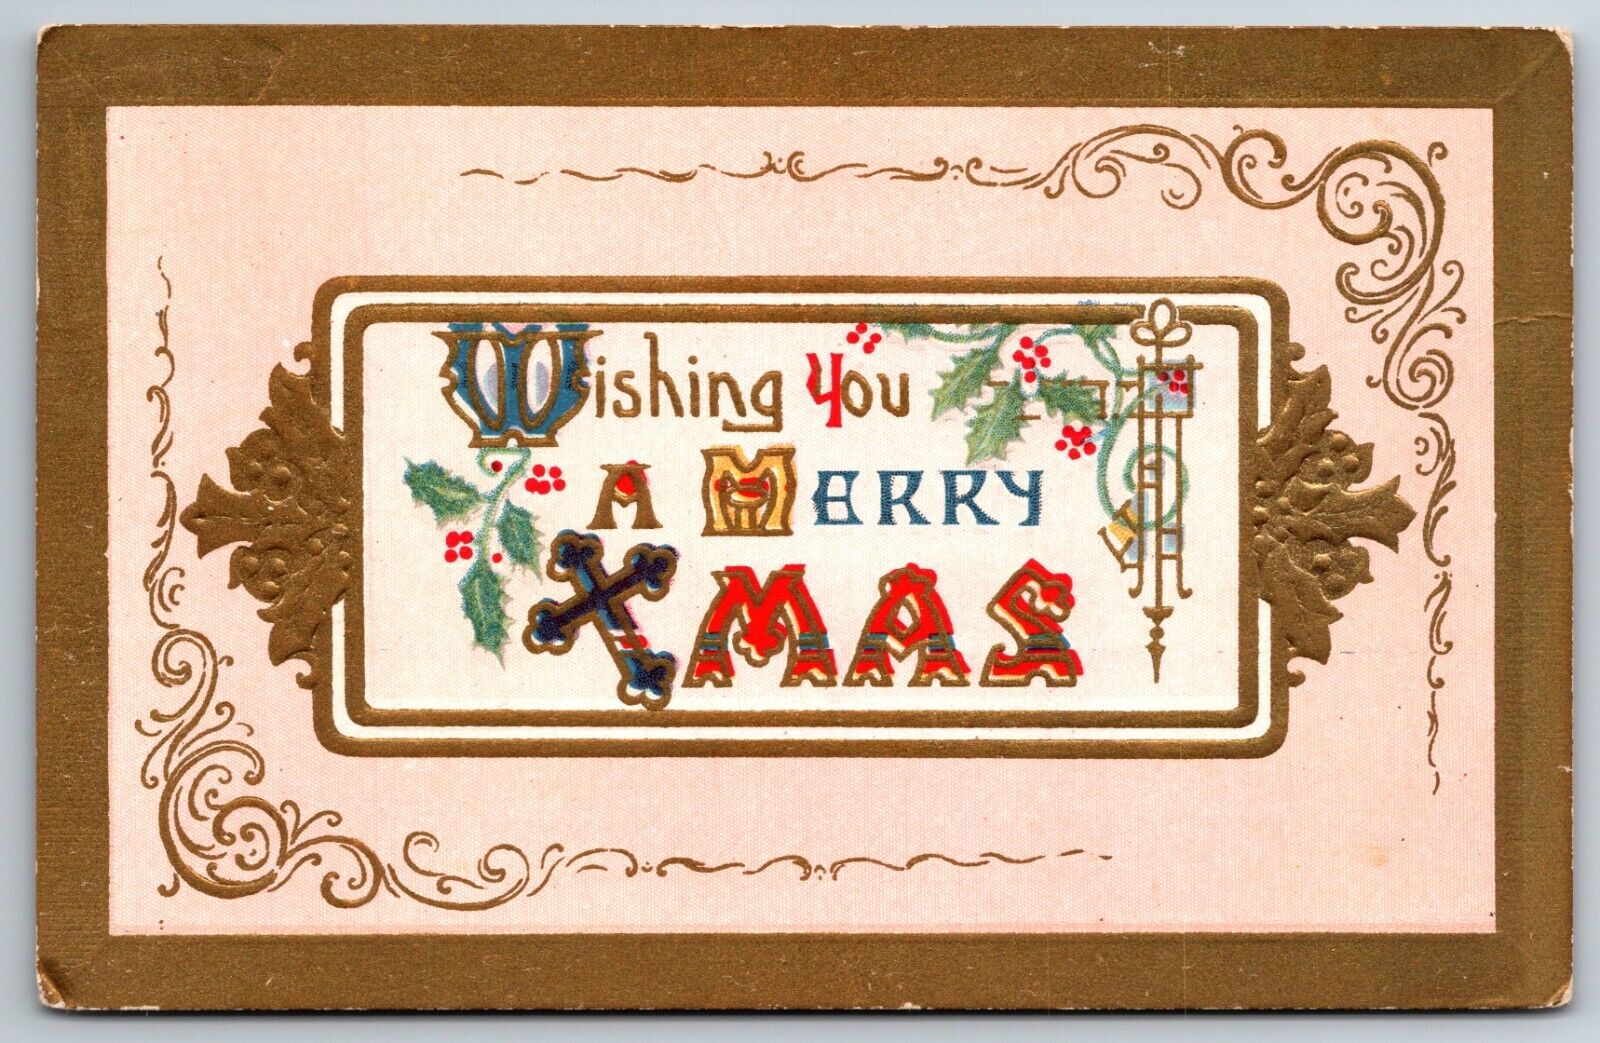 Wishing You a Merry Christmas 1912 Galesville Wisconsin Vintage Postcard